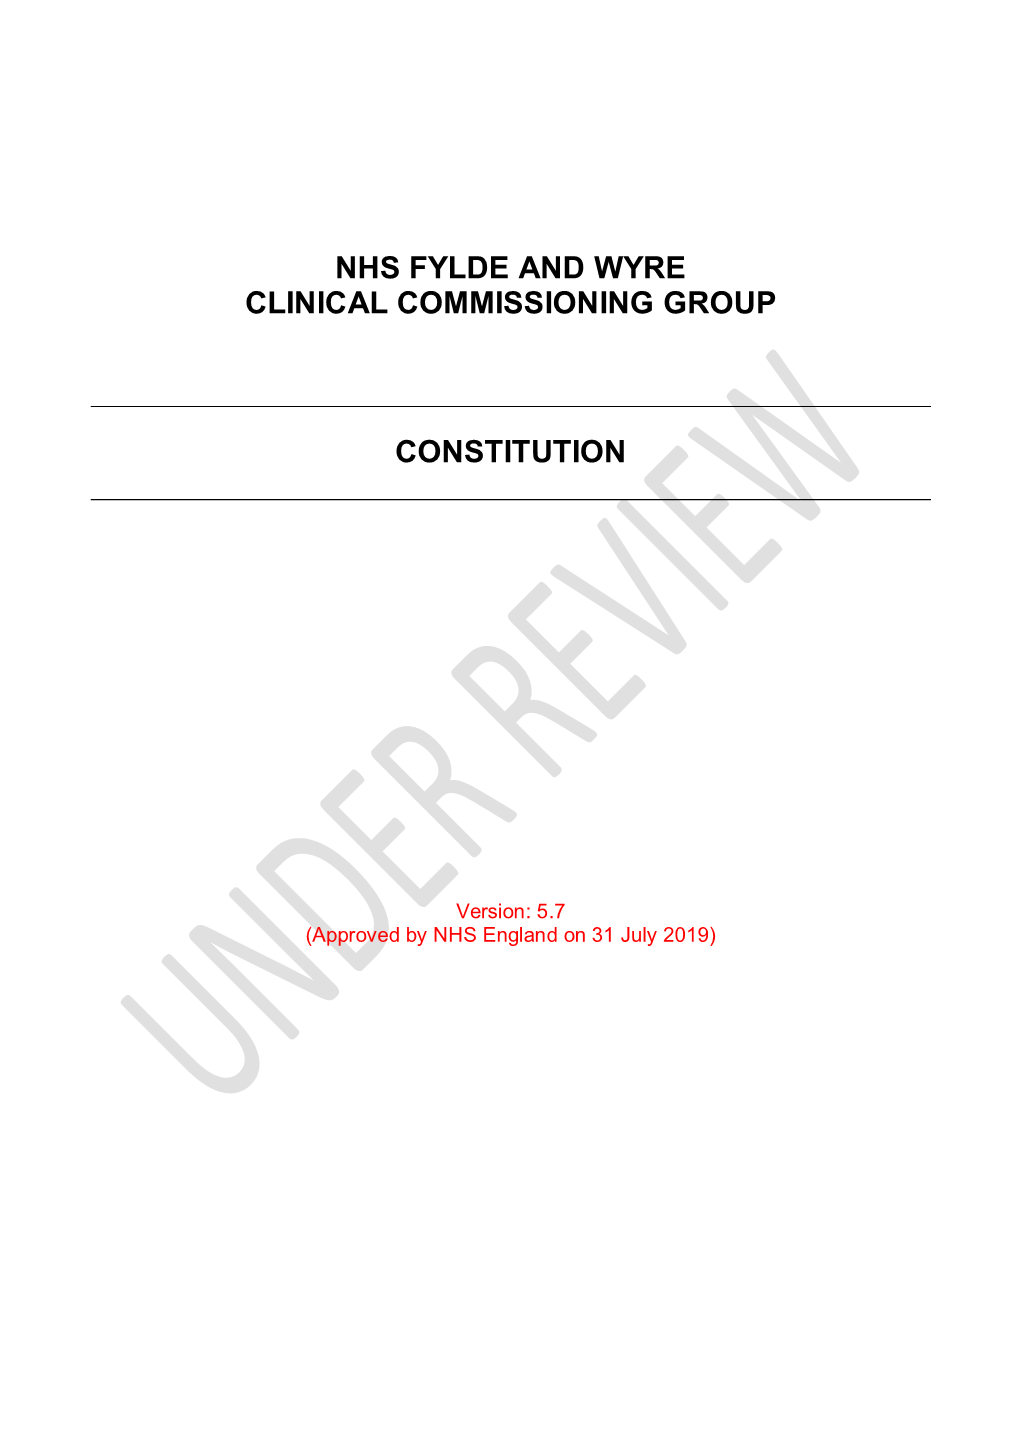 NHS Fylde and Wyre CCG Constitution